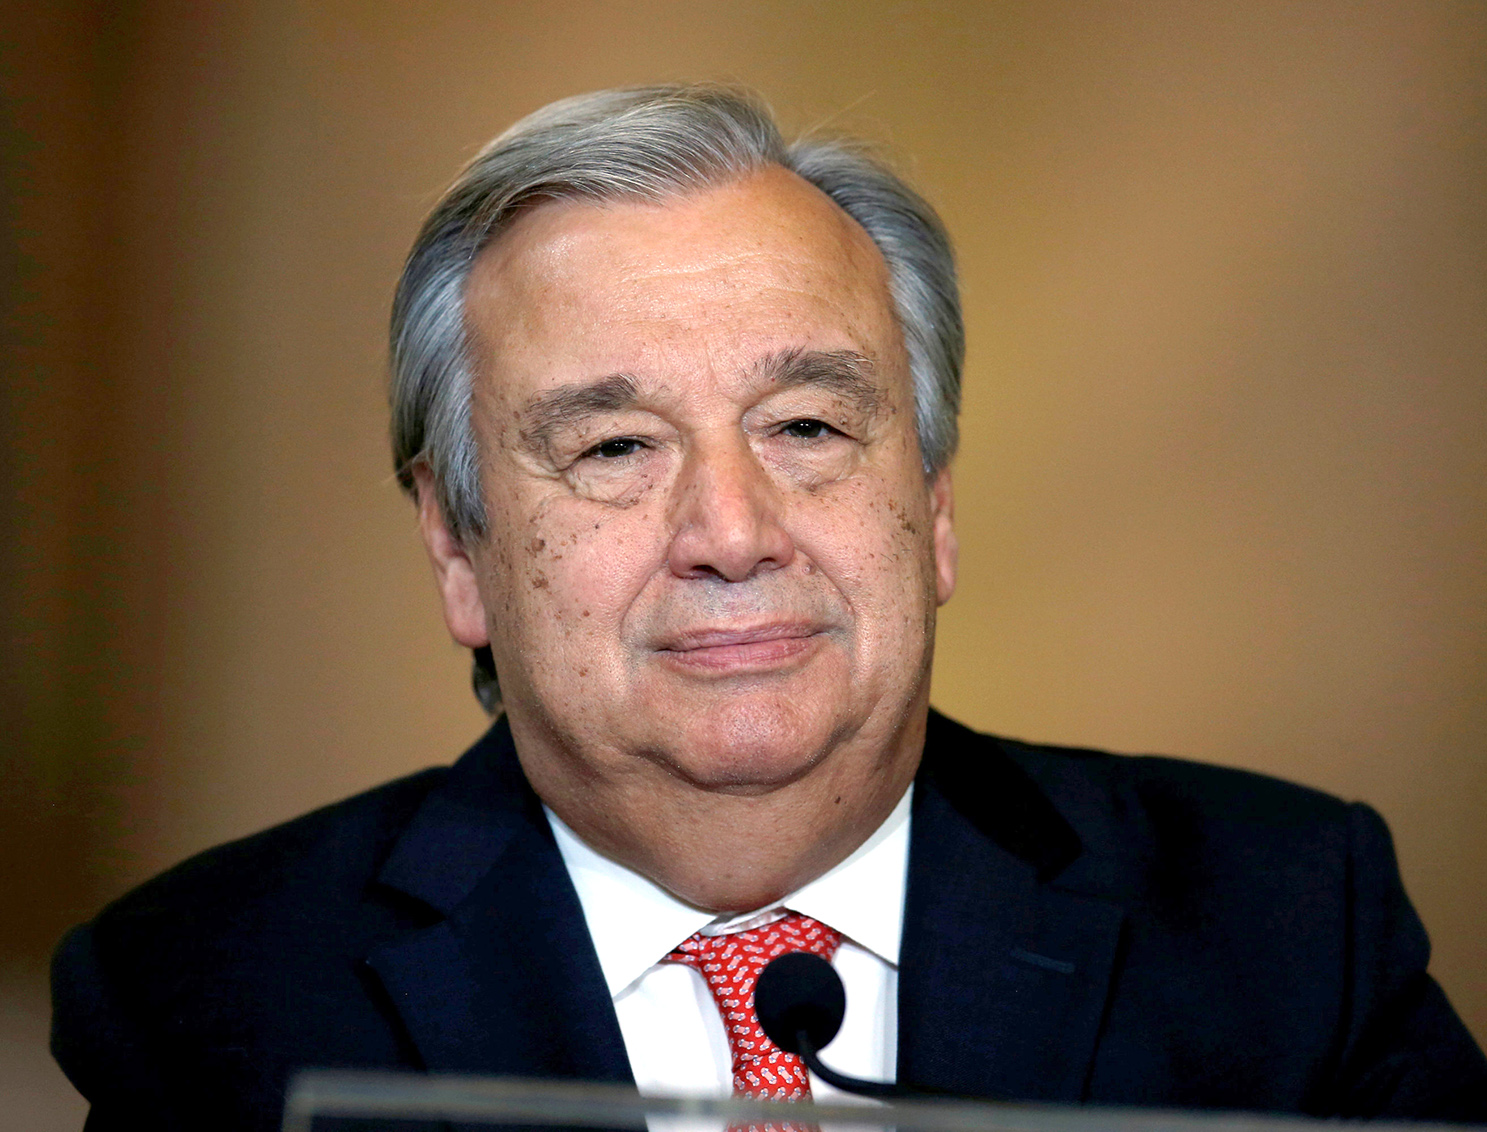 Former Portuguese prime minister Antonio Guterres speaks during an Oct. 6 news conference at Necessidades Palace in Lisbon after being nominated as United Nations secretary-general. The Portuguese Bishops Conference praised Guterres for his "deep sense of humanity and faith" after his nomination. (CNS photo/Rafael Marchante, Reuters)